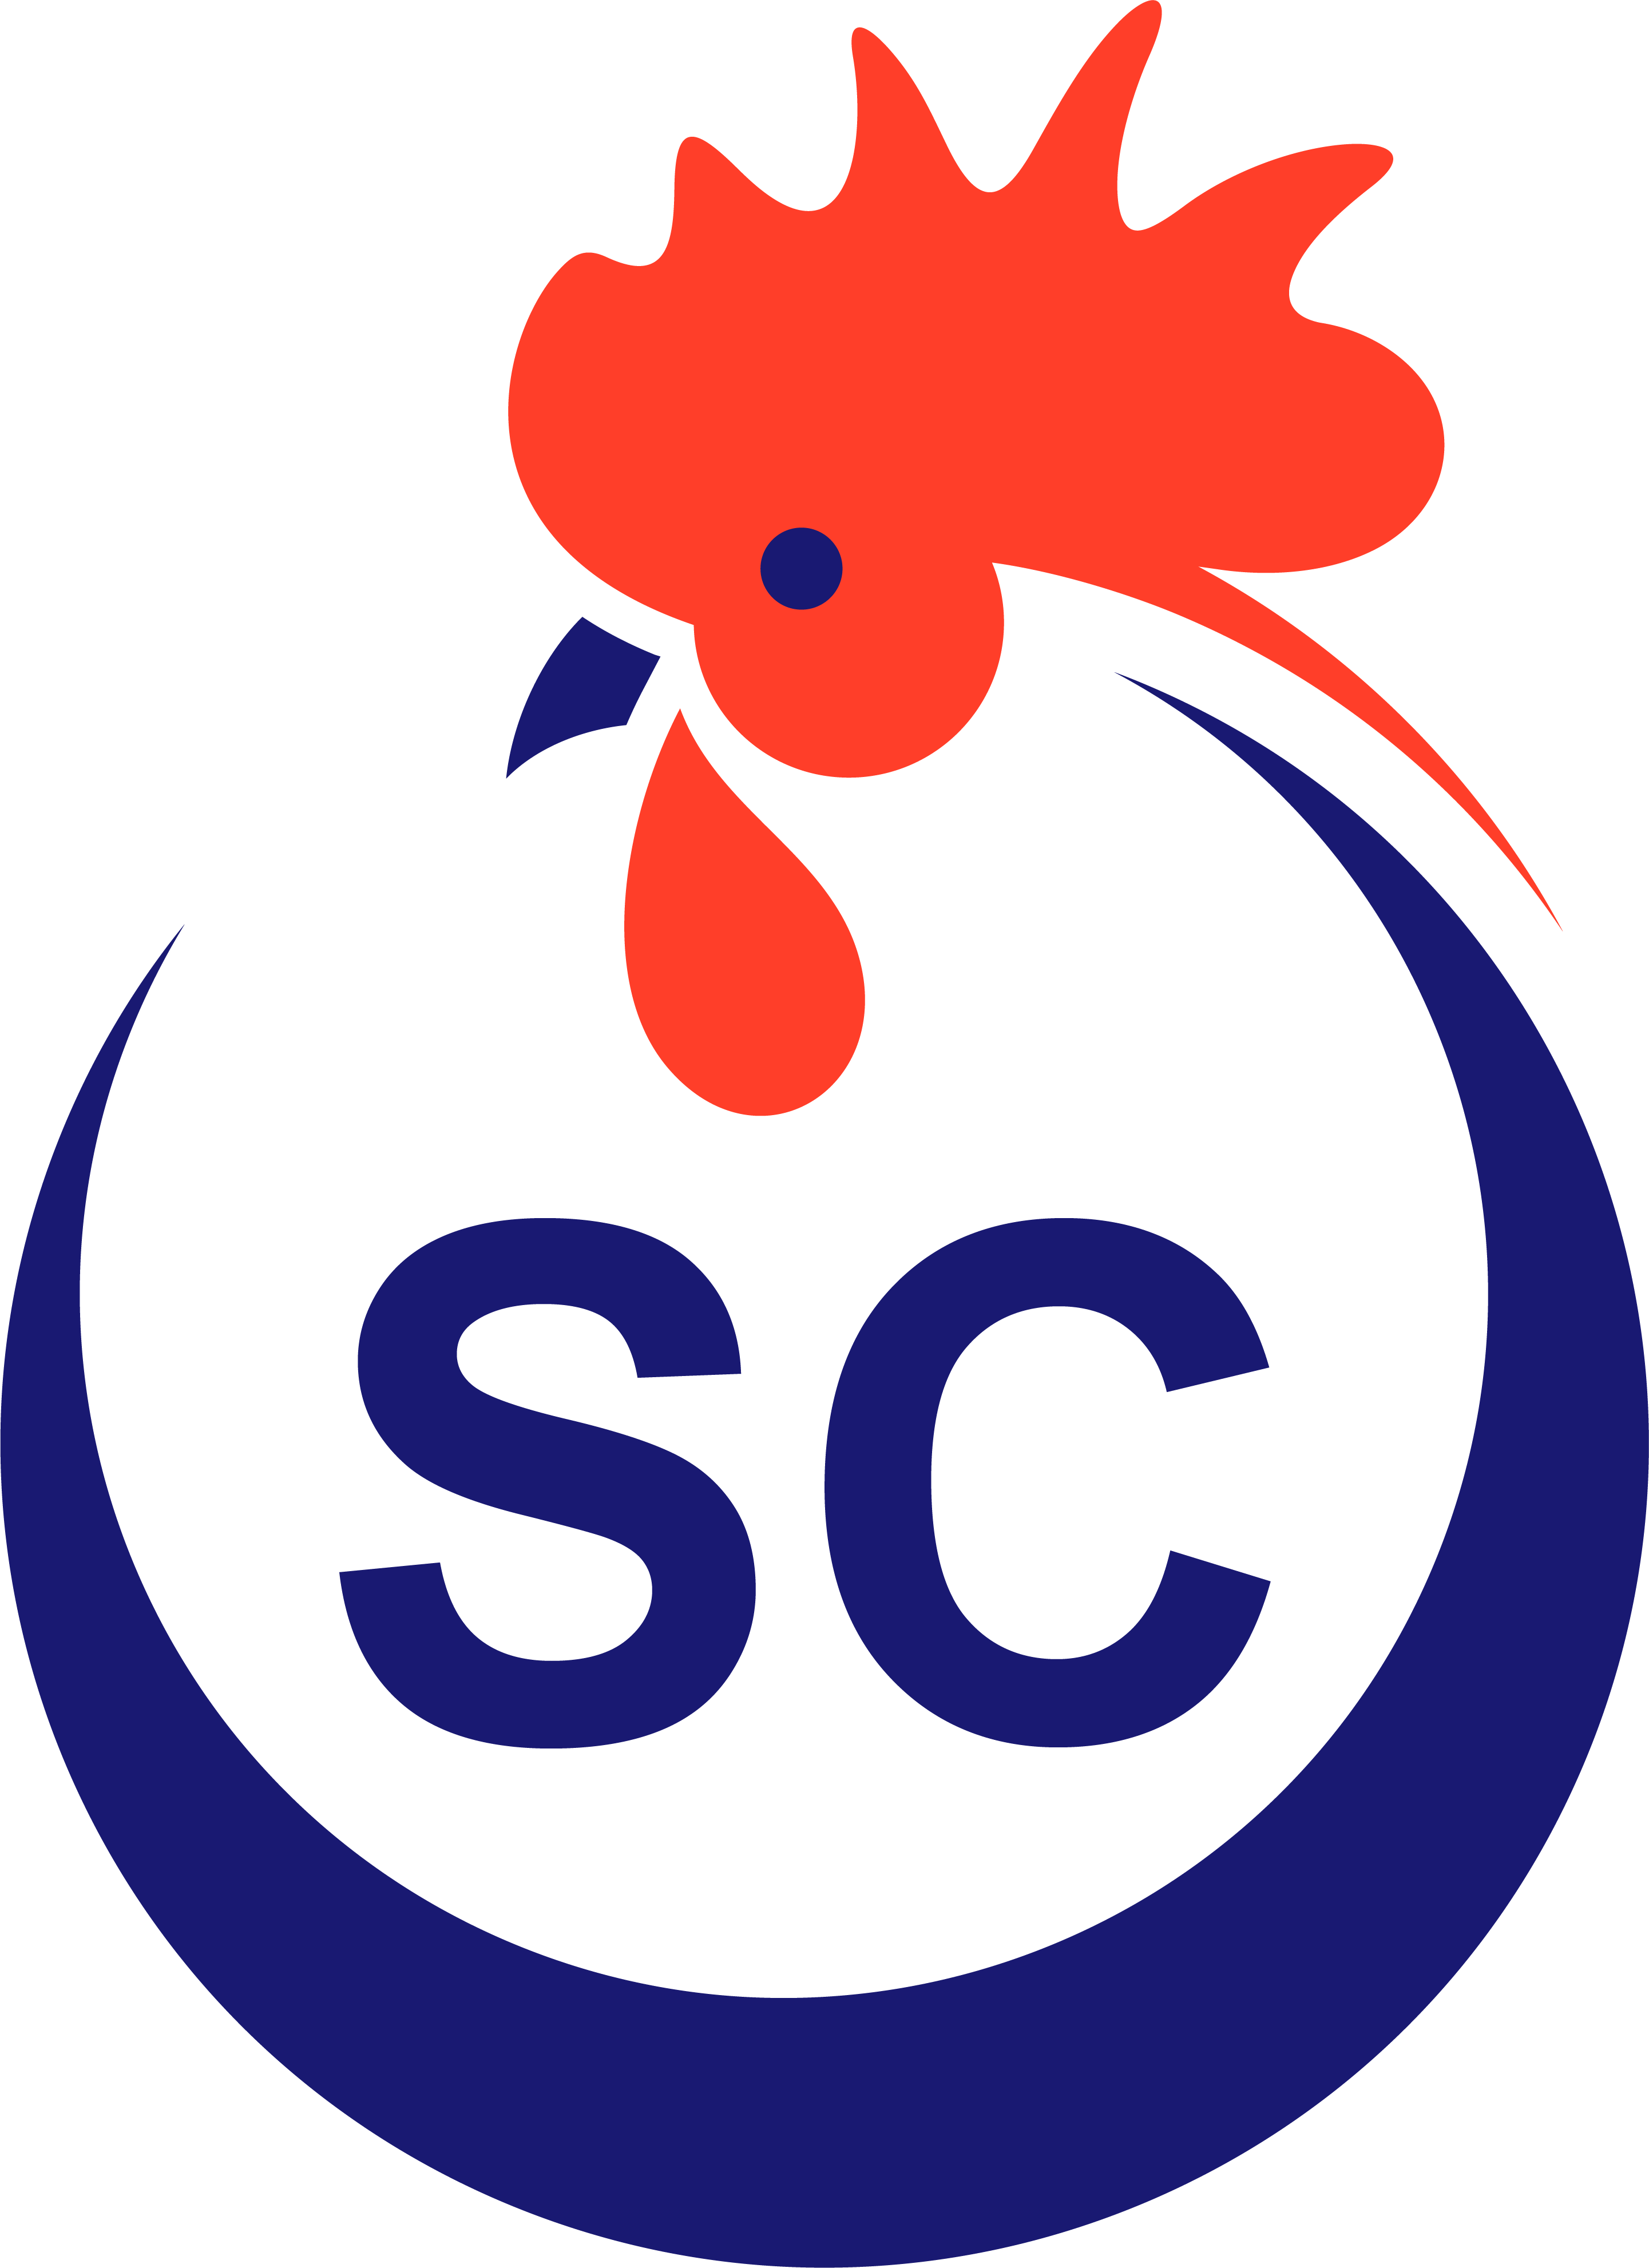 South Carolina rooster icon